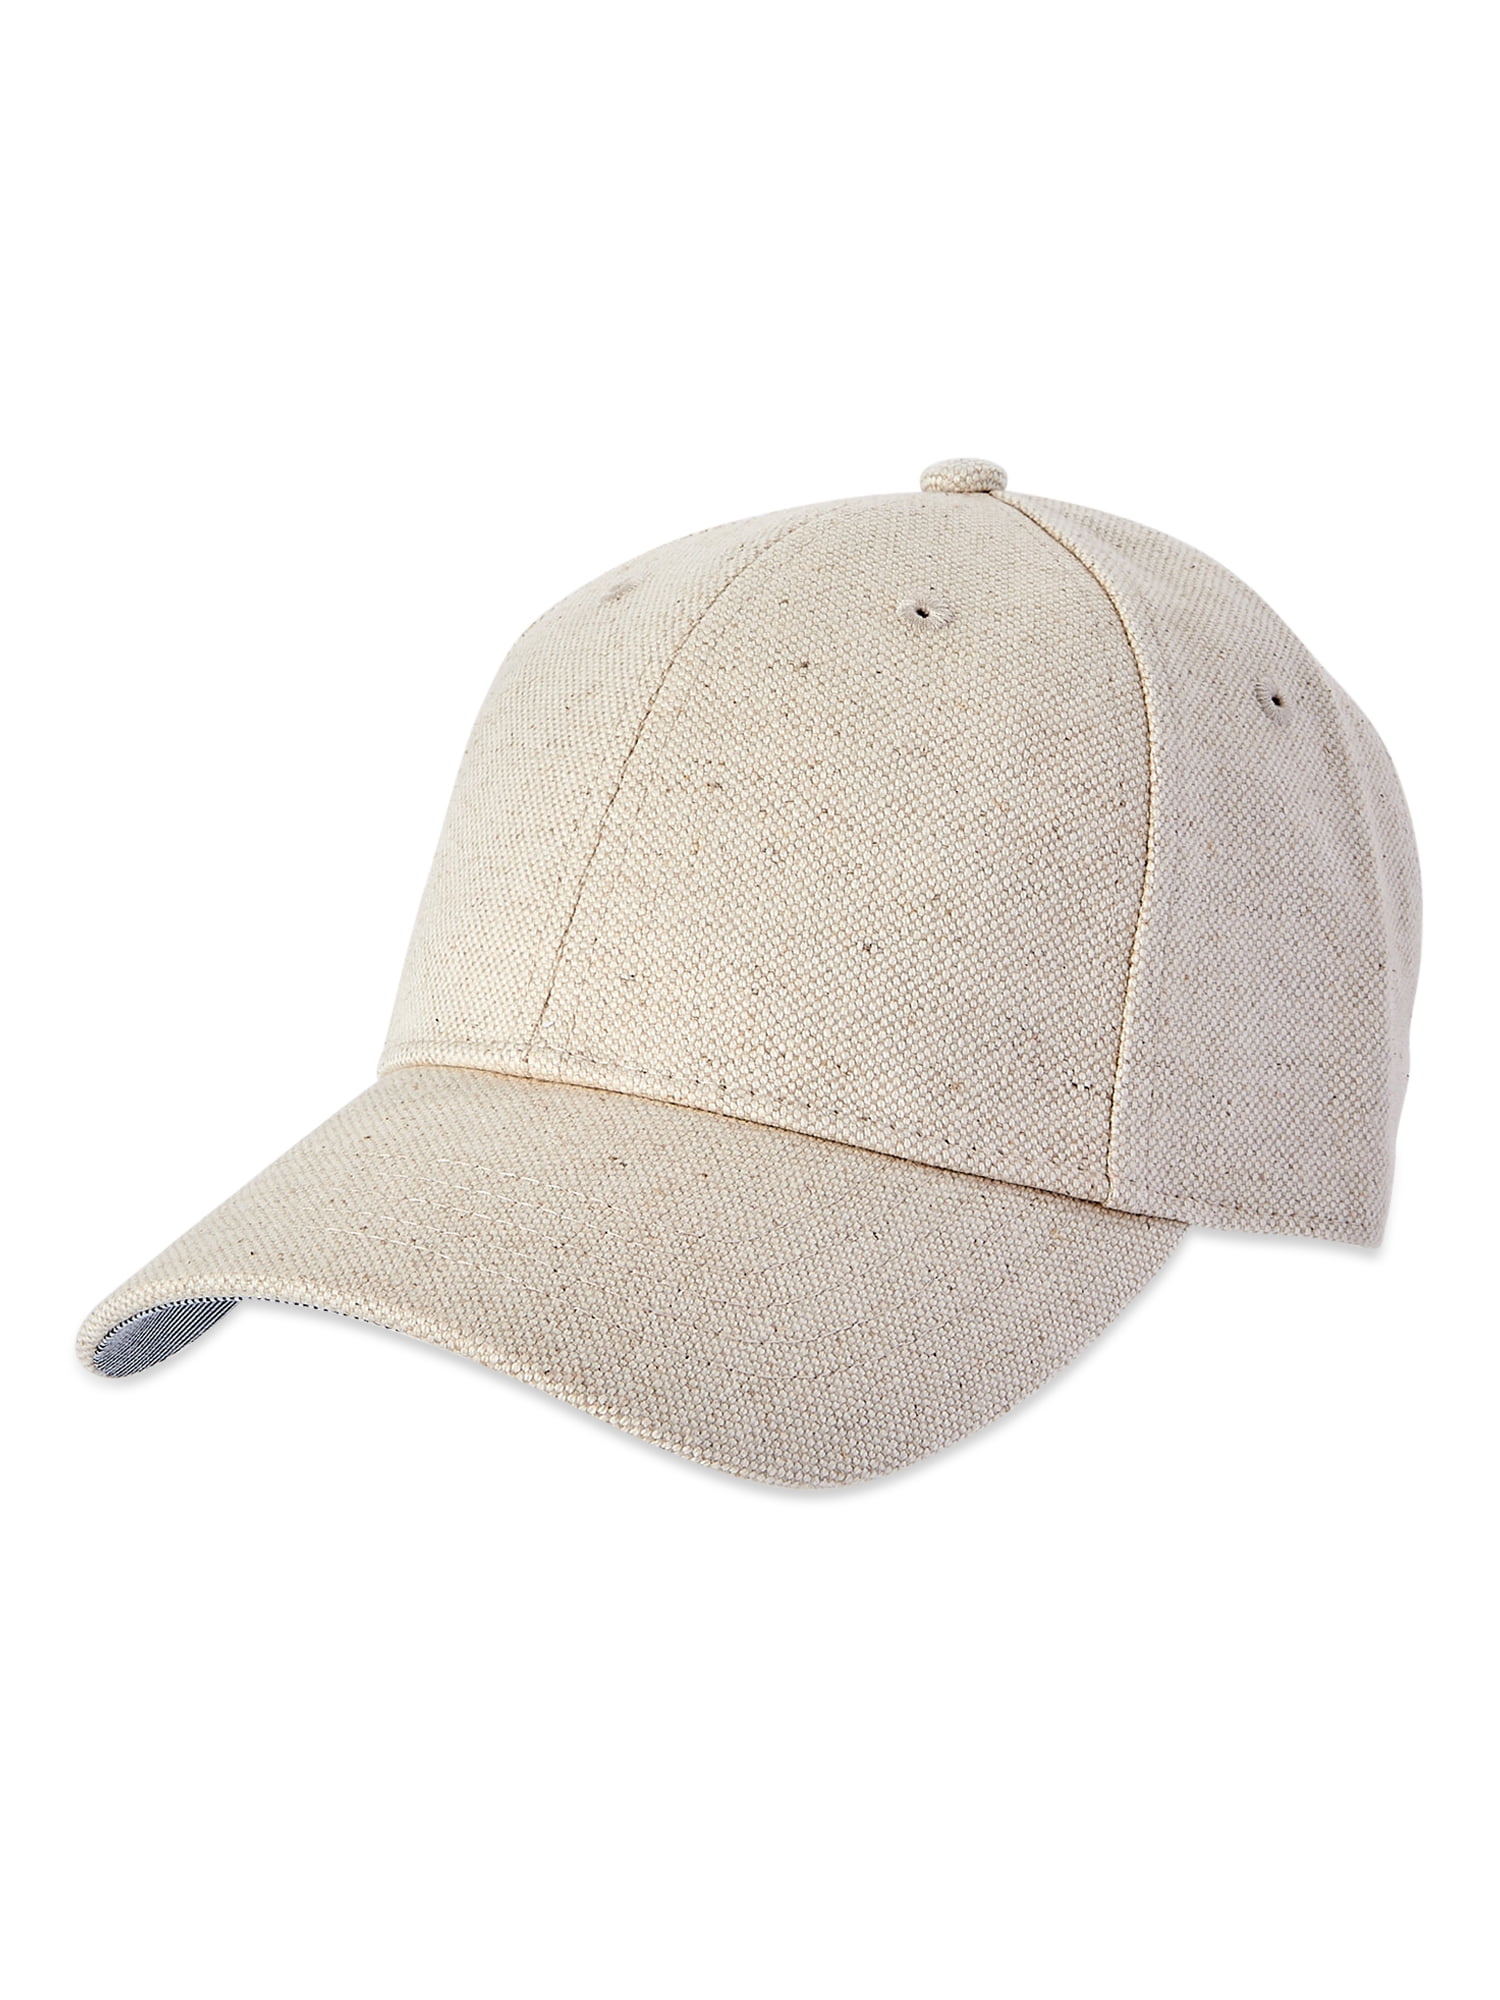 'Beechfield' Patrol Cap colour: khaki with embroidered Hounds Off logo 